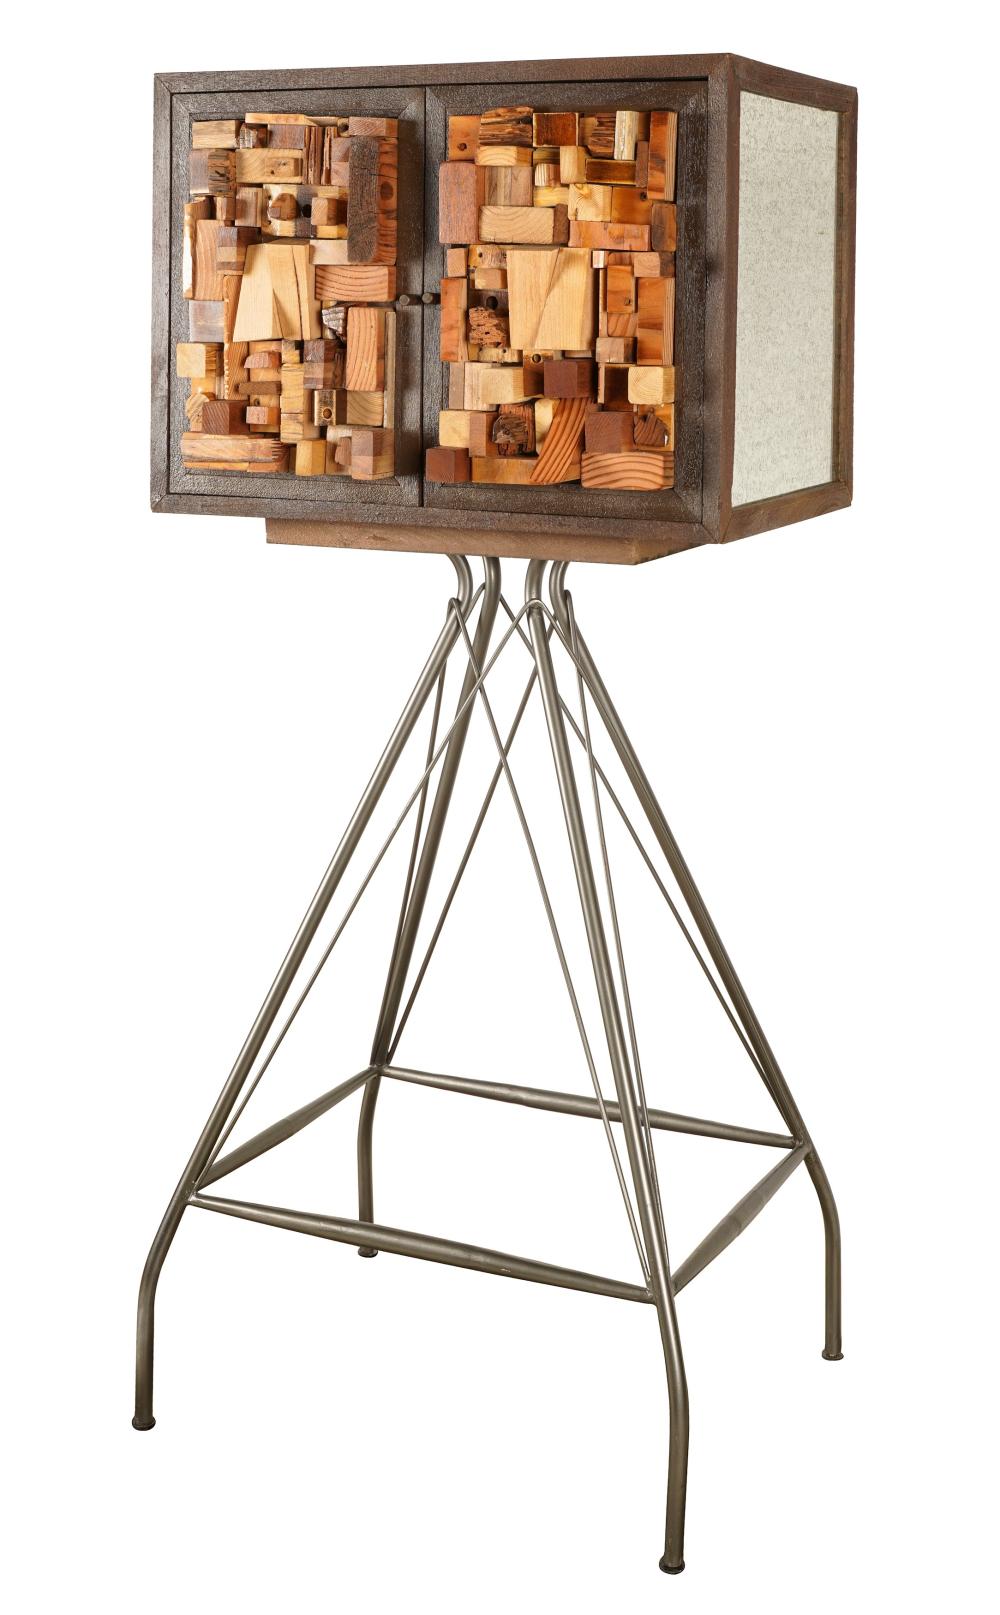 BRUTALIST-STYLE WINE CABINET ON